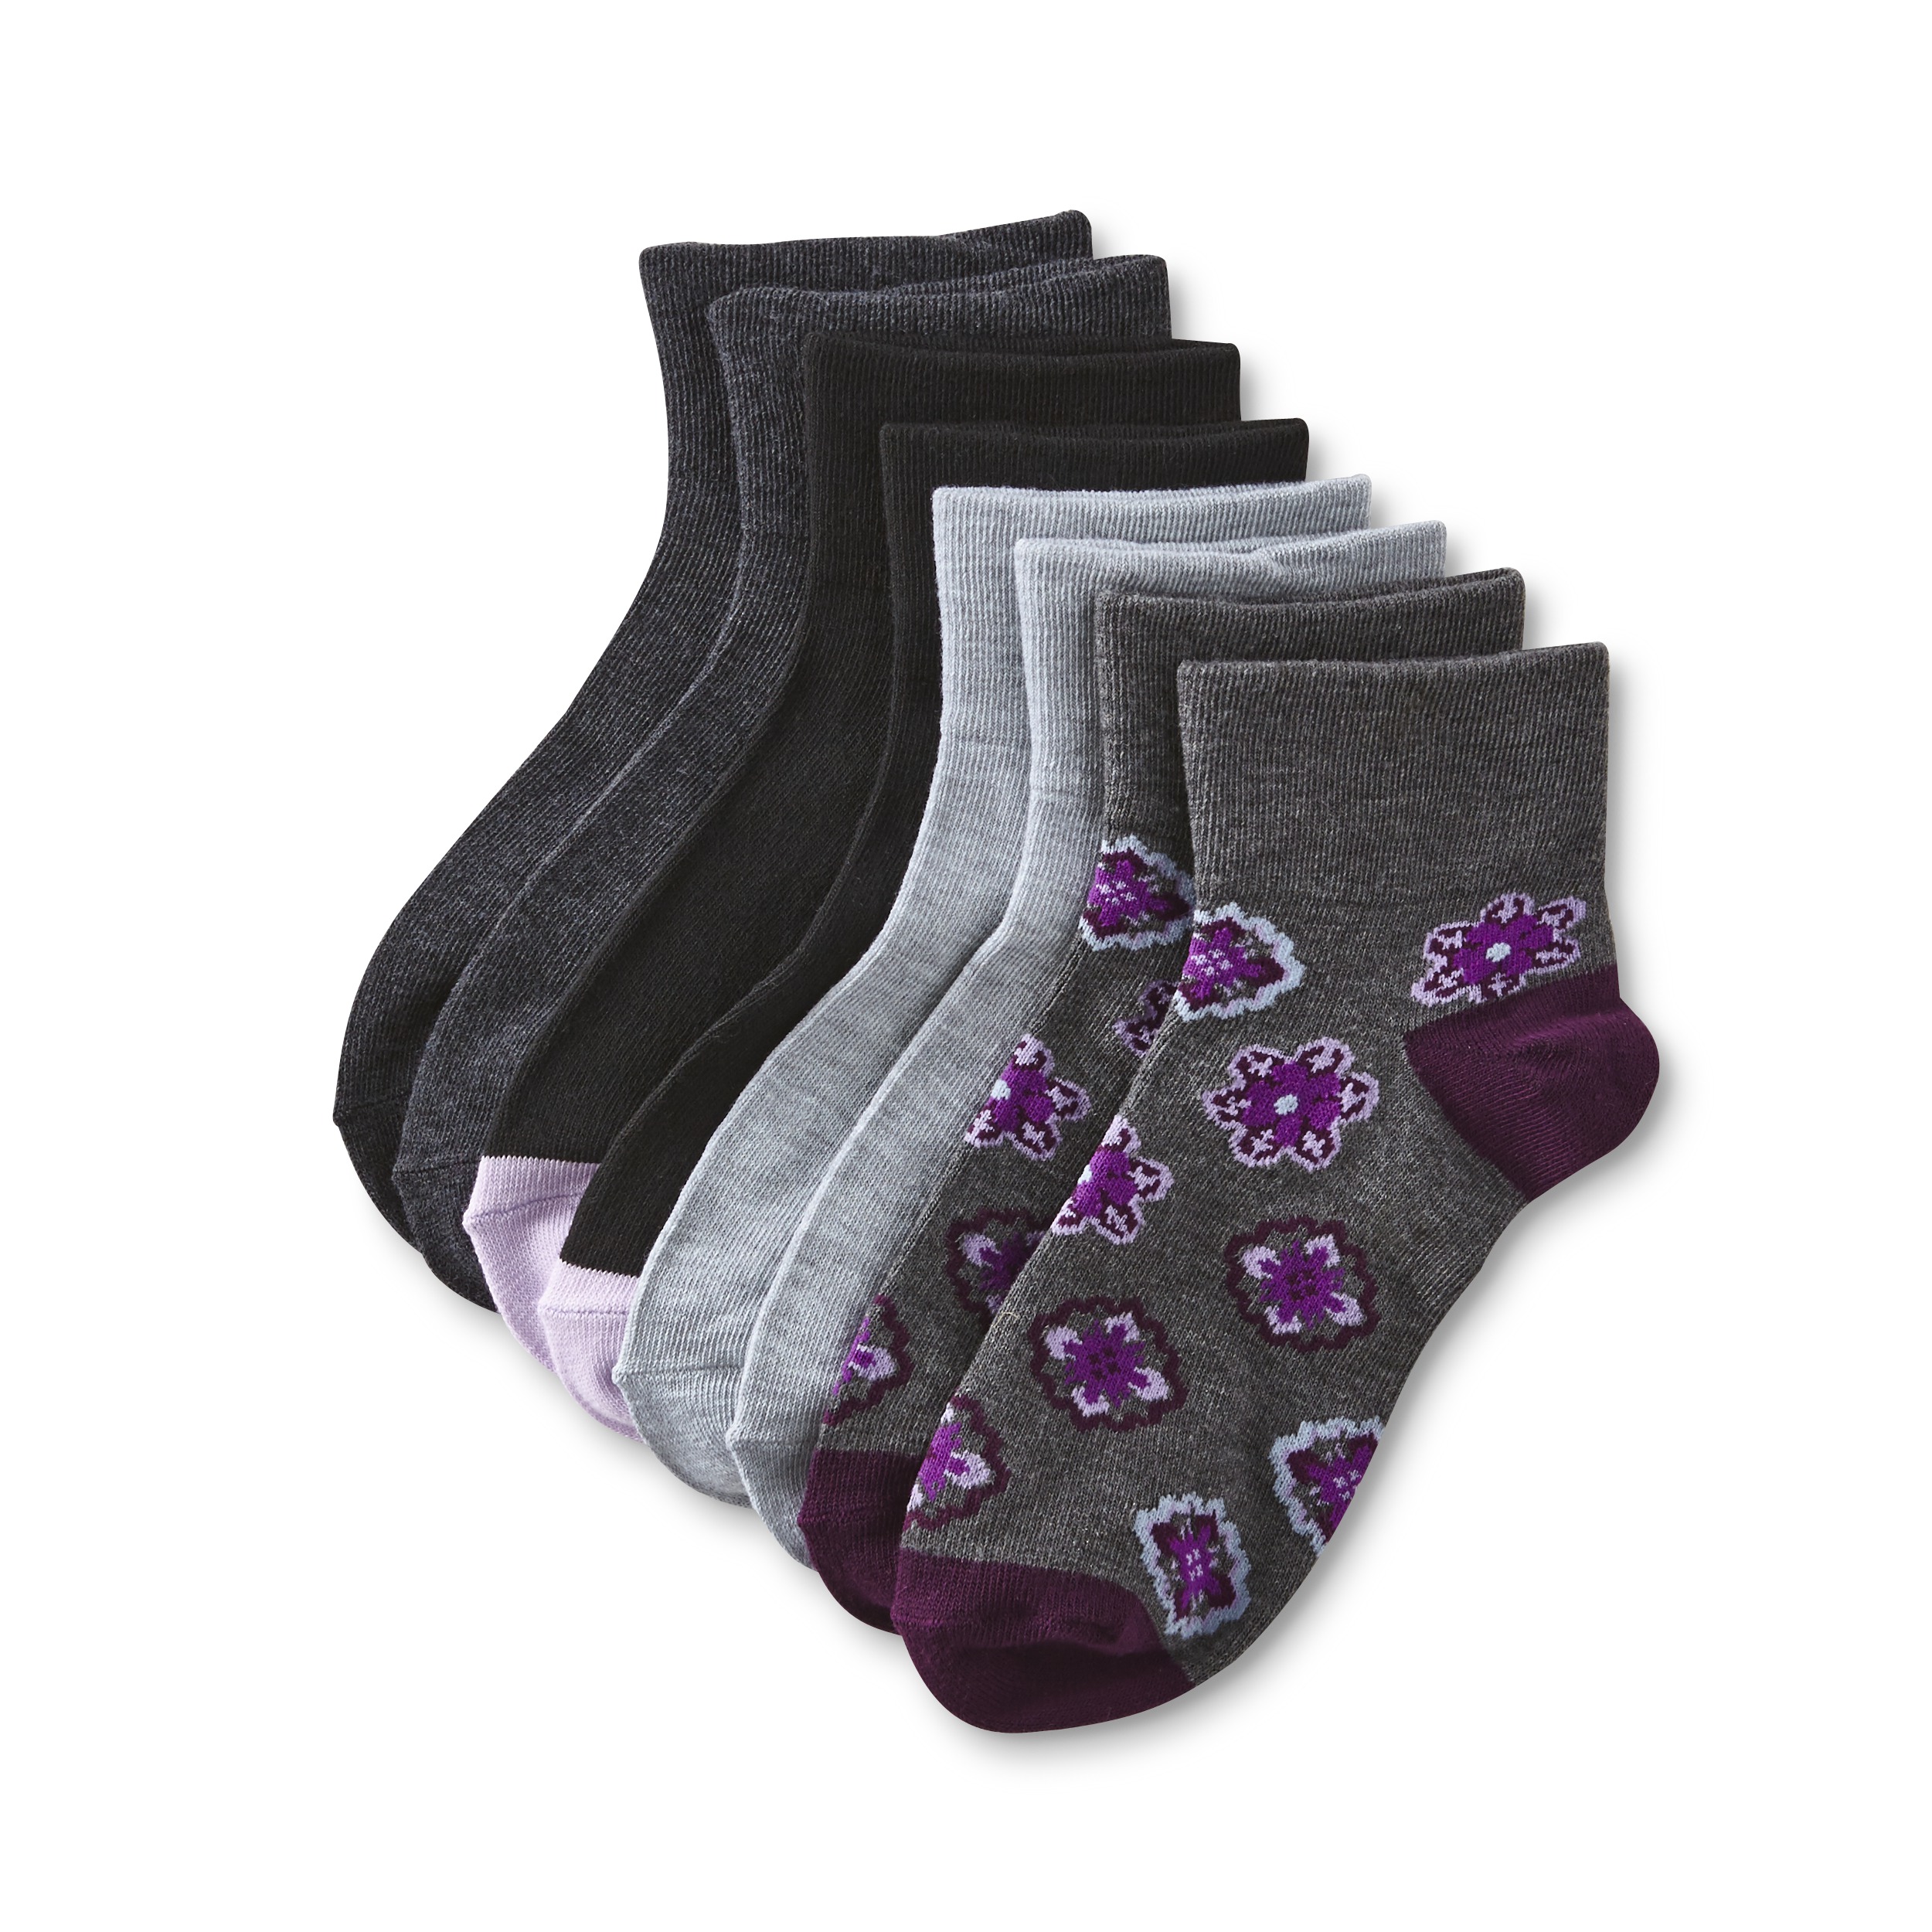 Women's 4-Pairs Ankle Socks - Floral